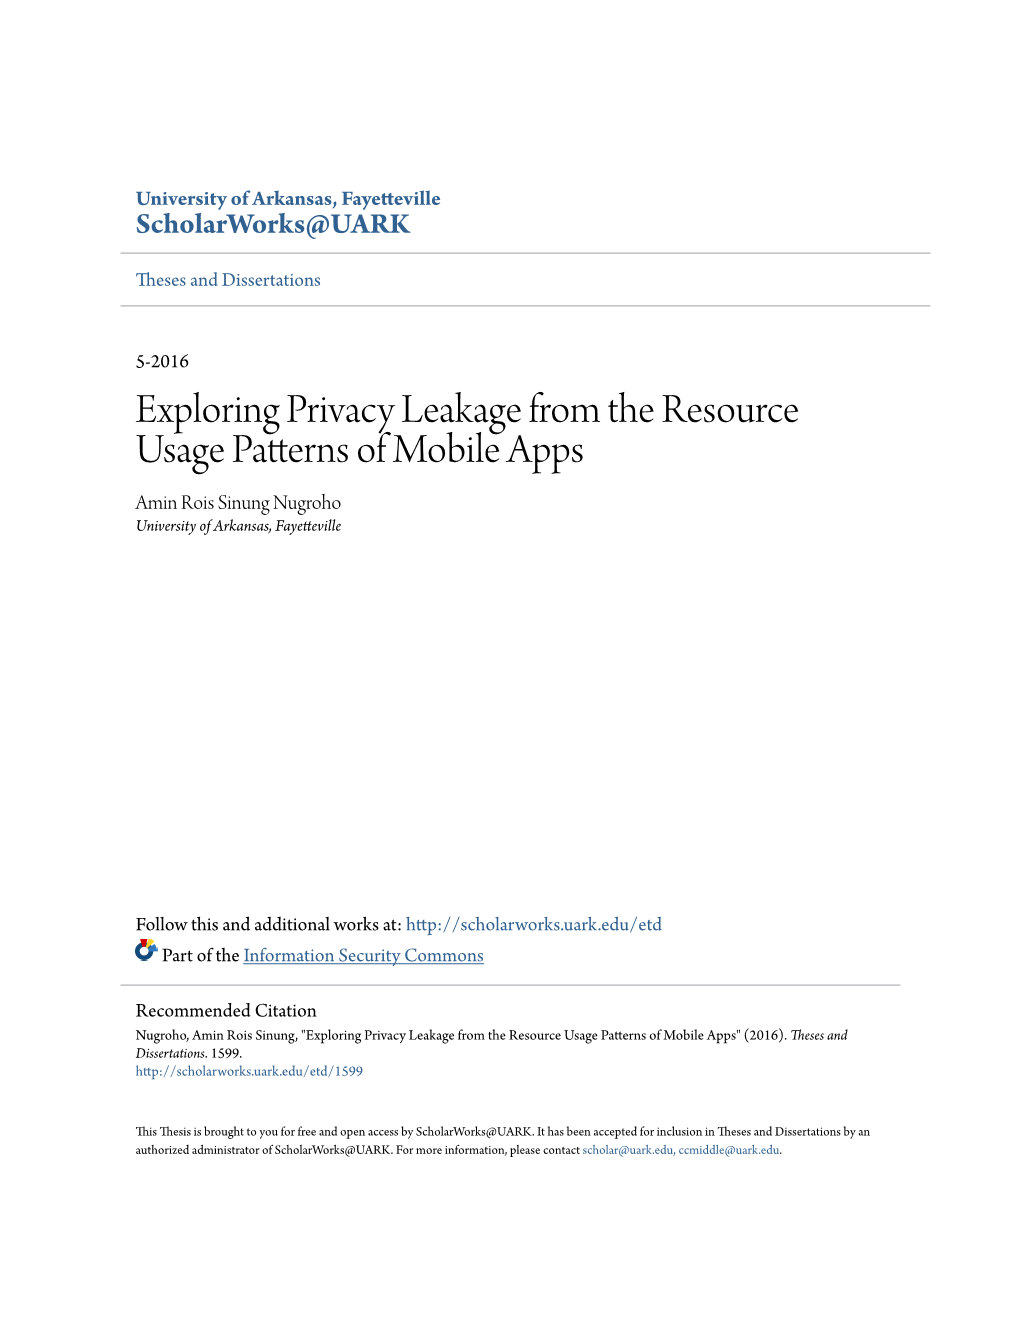 Exploring Privacy Leakage from the Resource Usage Patterns of Mobile Apps Amin Rois Sinung Nugroho University of Arkansas, Fayetteville